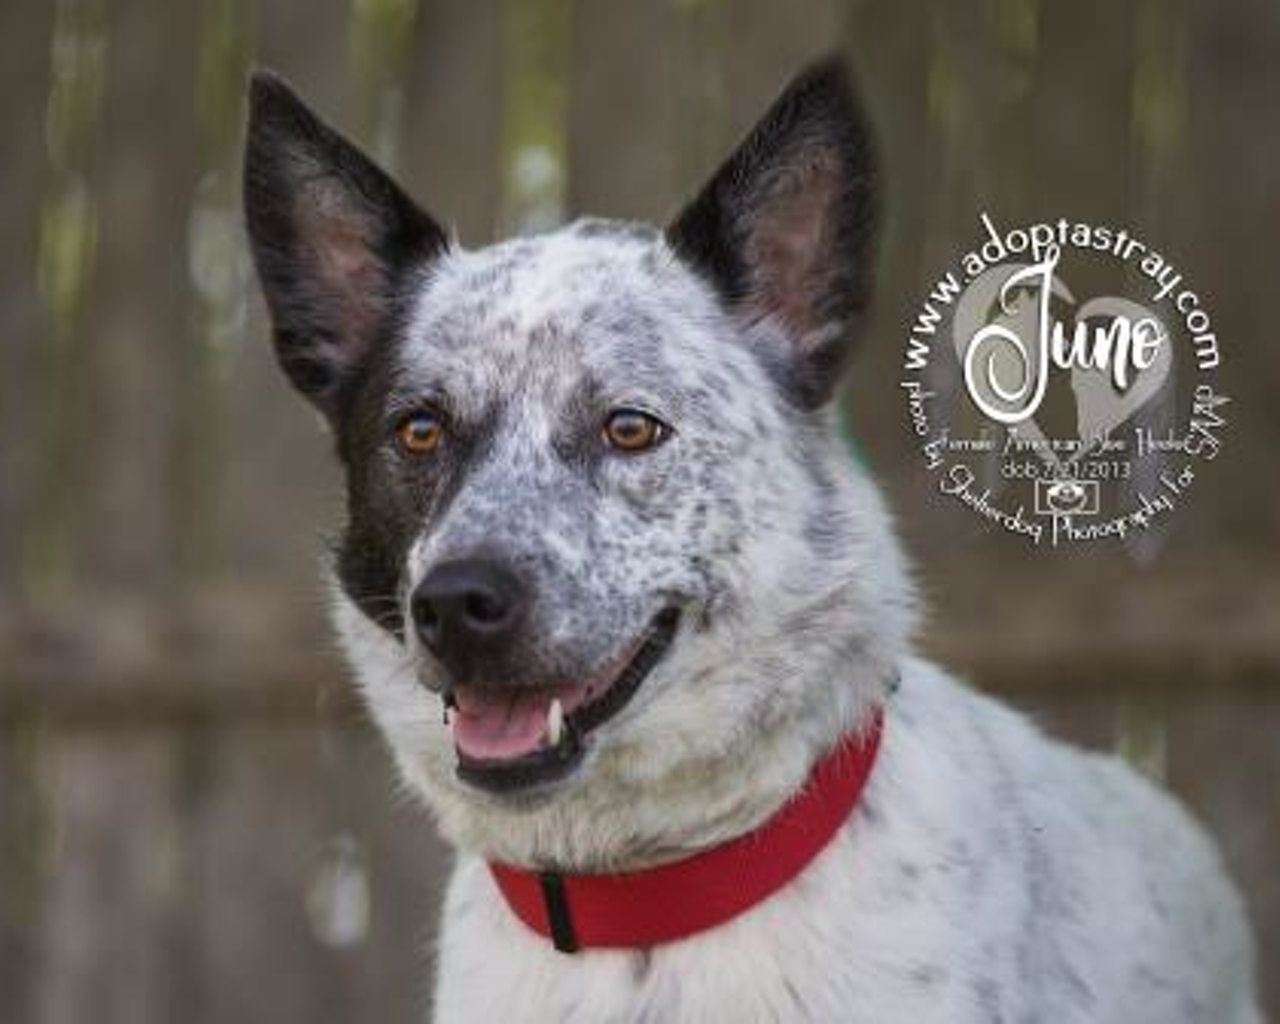 Name: Juno | Breed: American Blue Heeler/Mix | Sex: Female | Age: 5 years old | Rescue: SAAP